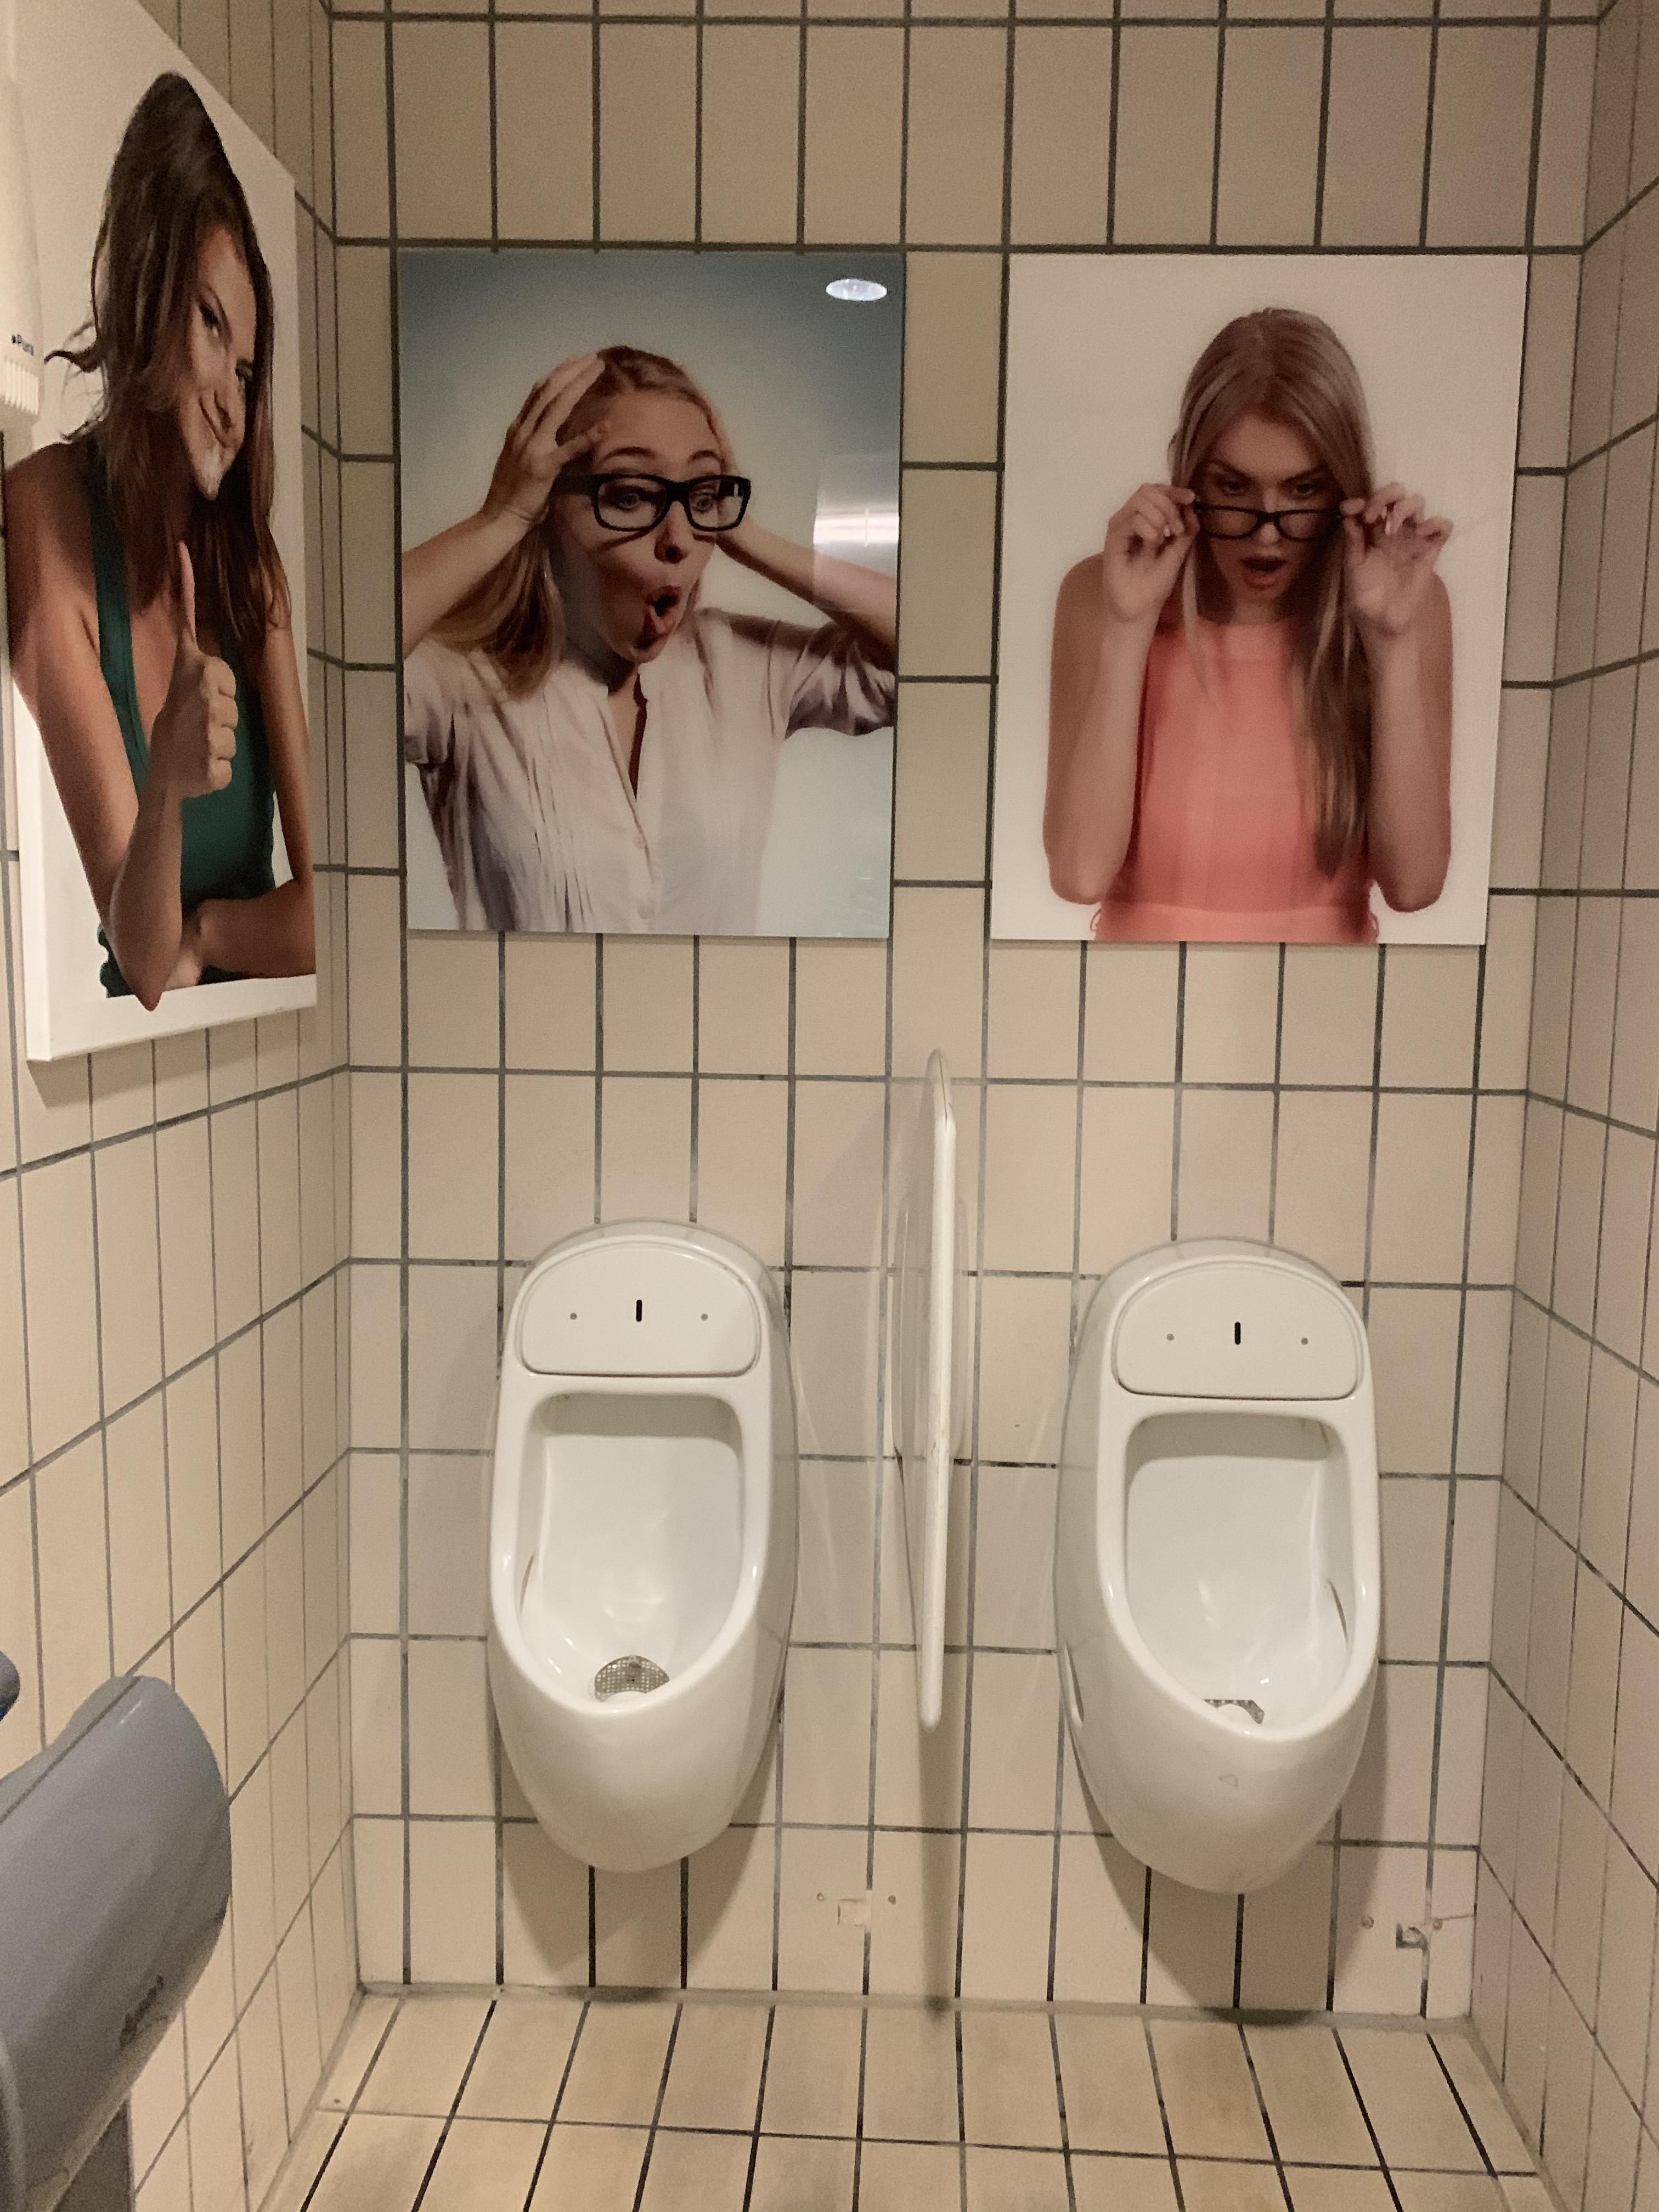 Bathroom in Swiss gas station I stopped at